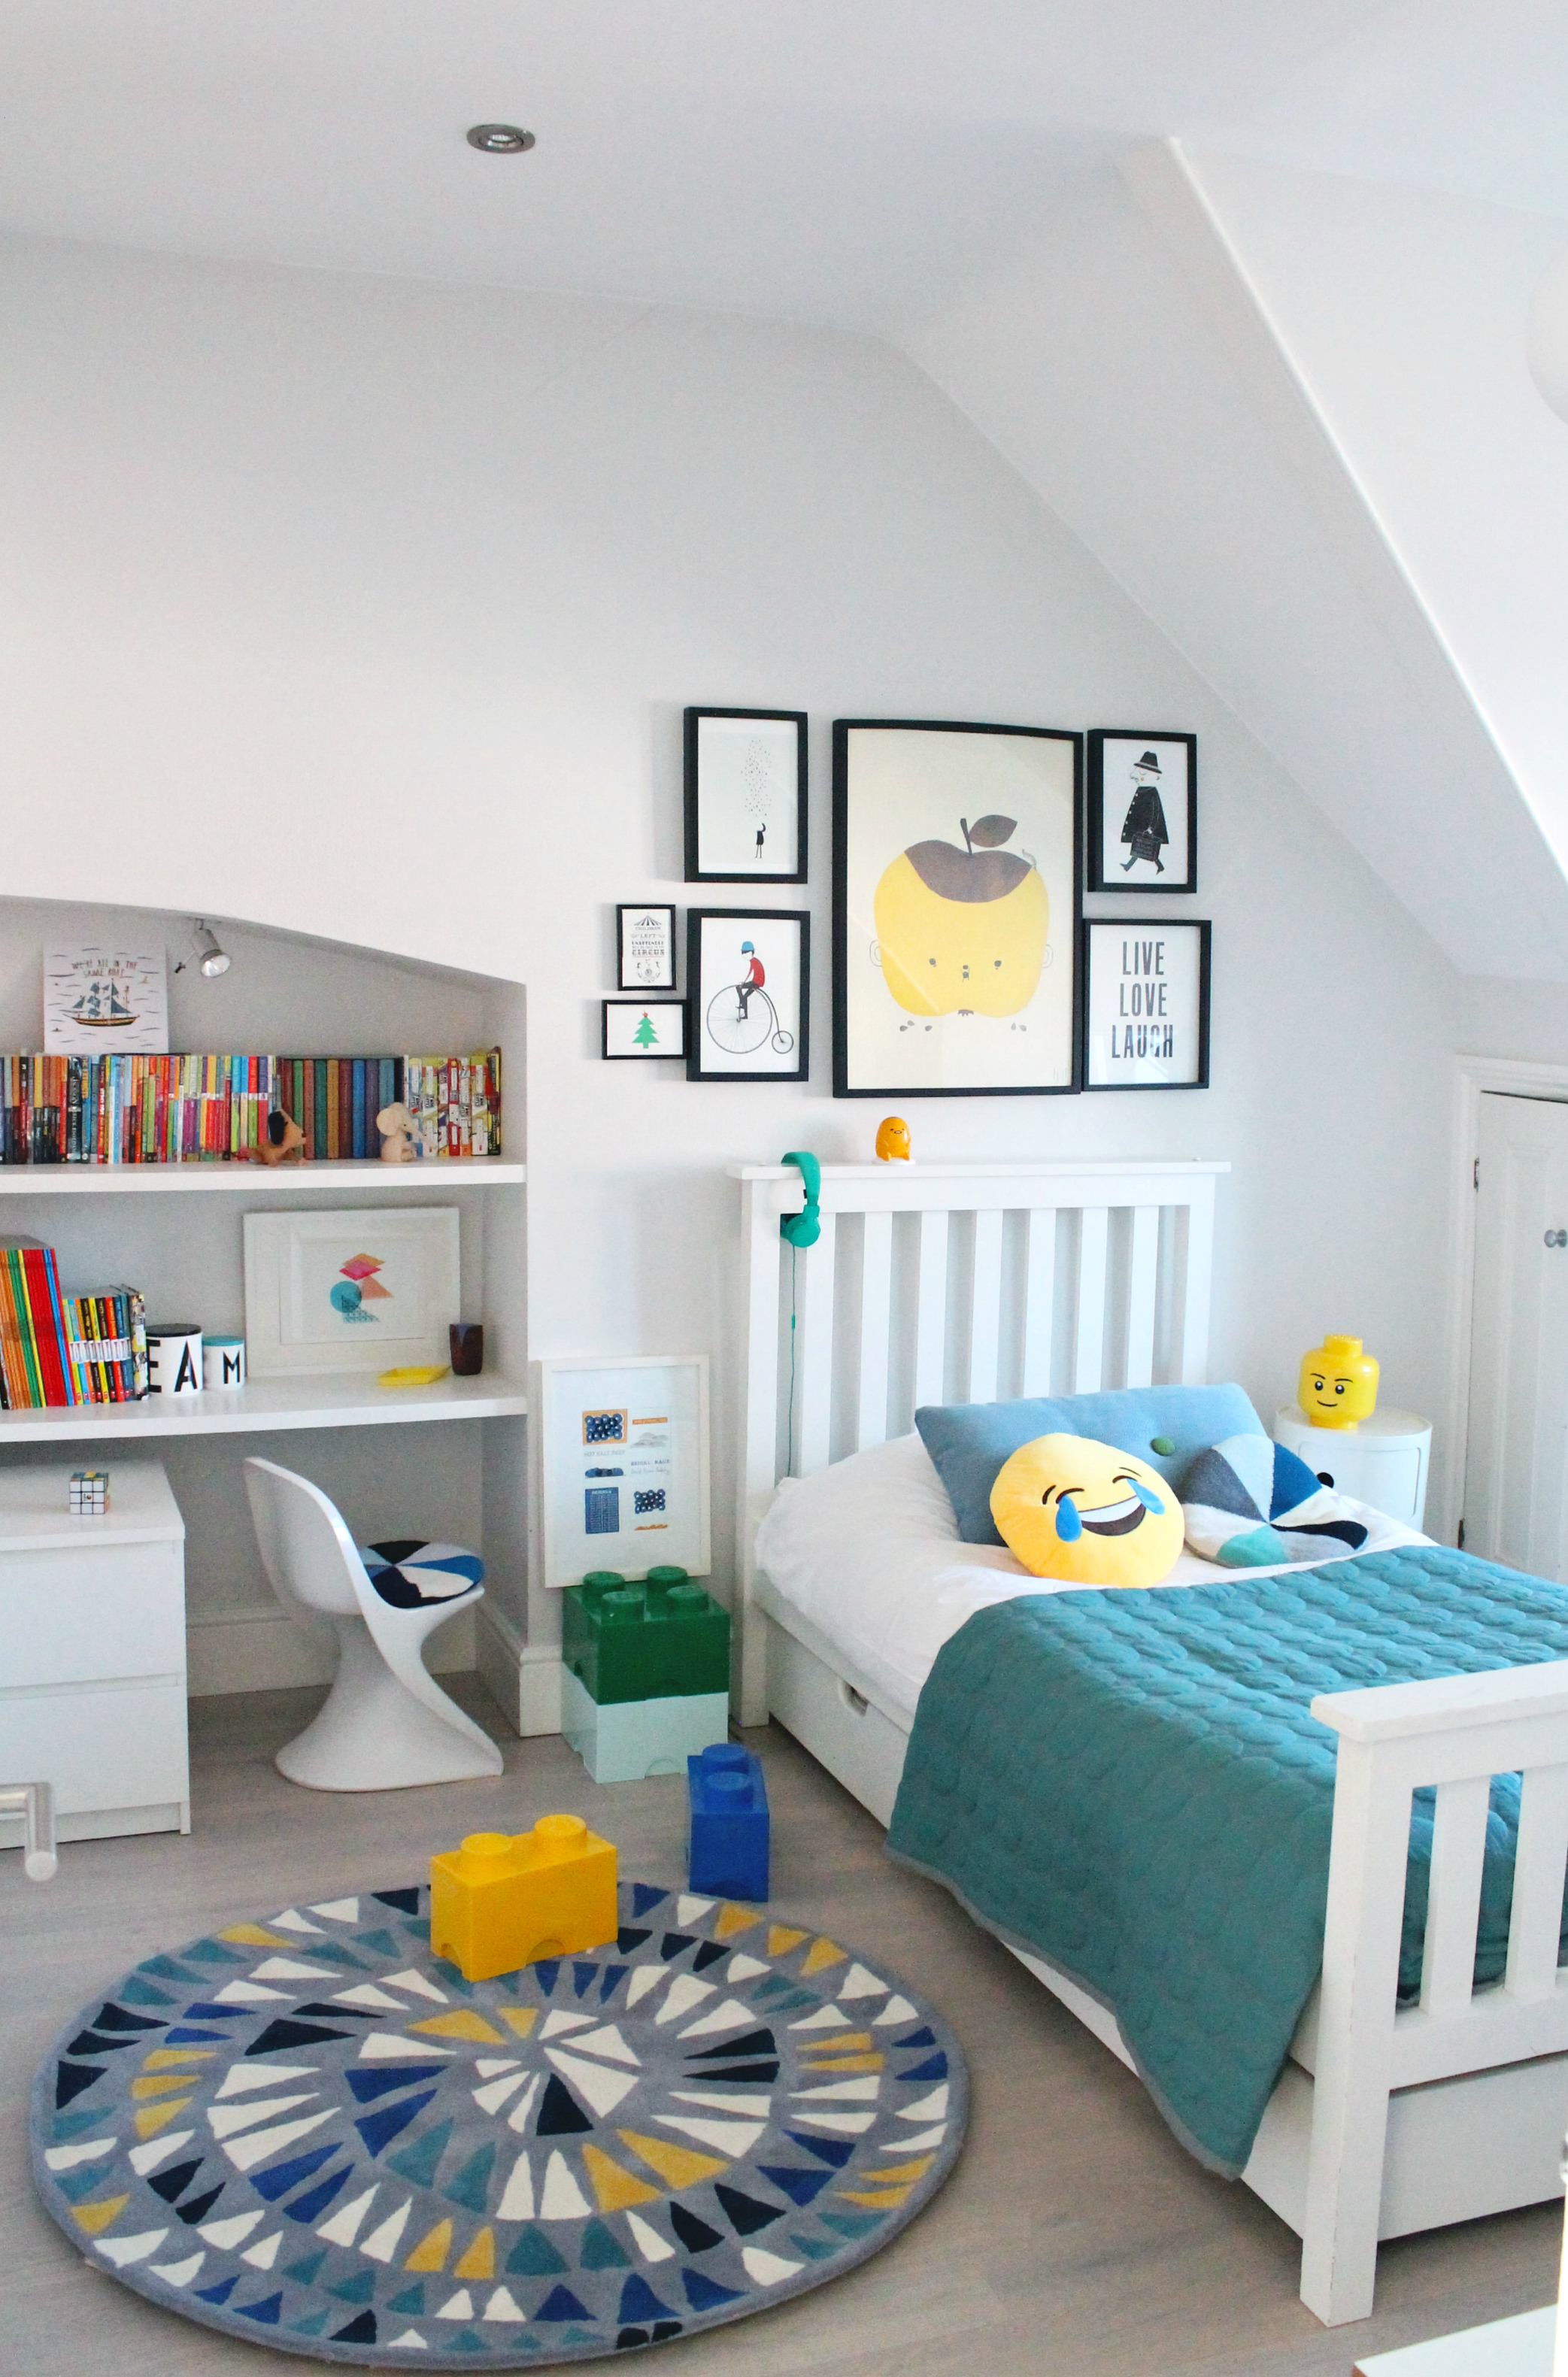 littleBIGBELL Boy's bedroom Ideas. Decorating with a rug ...